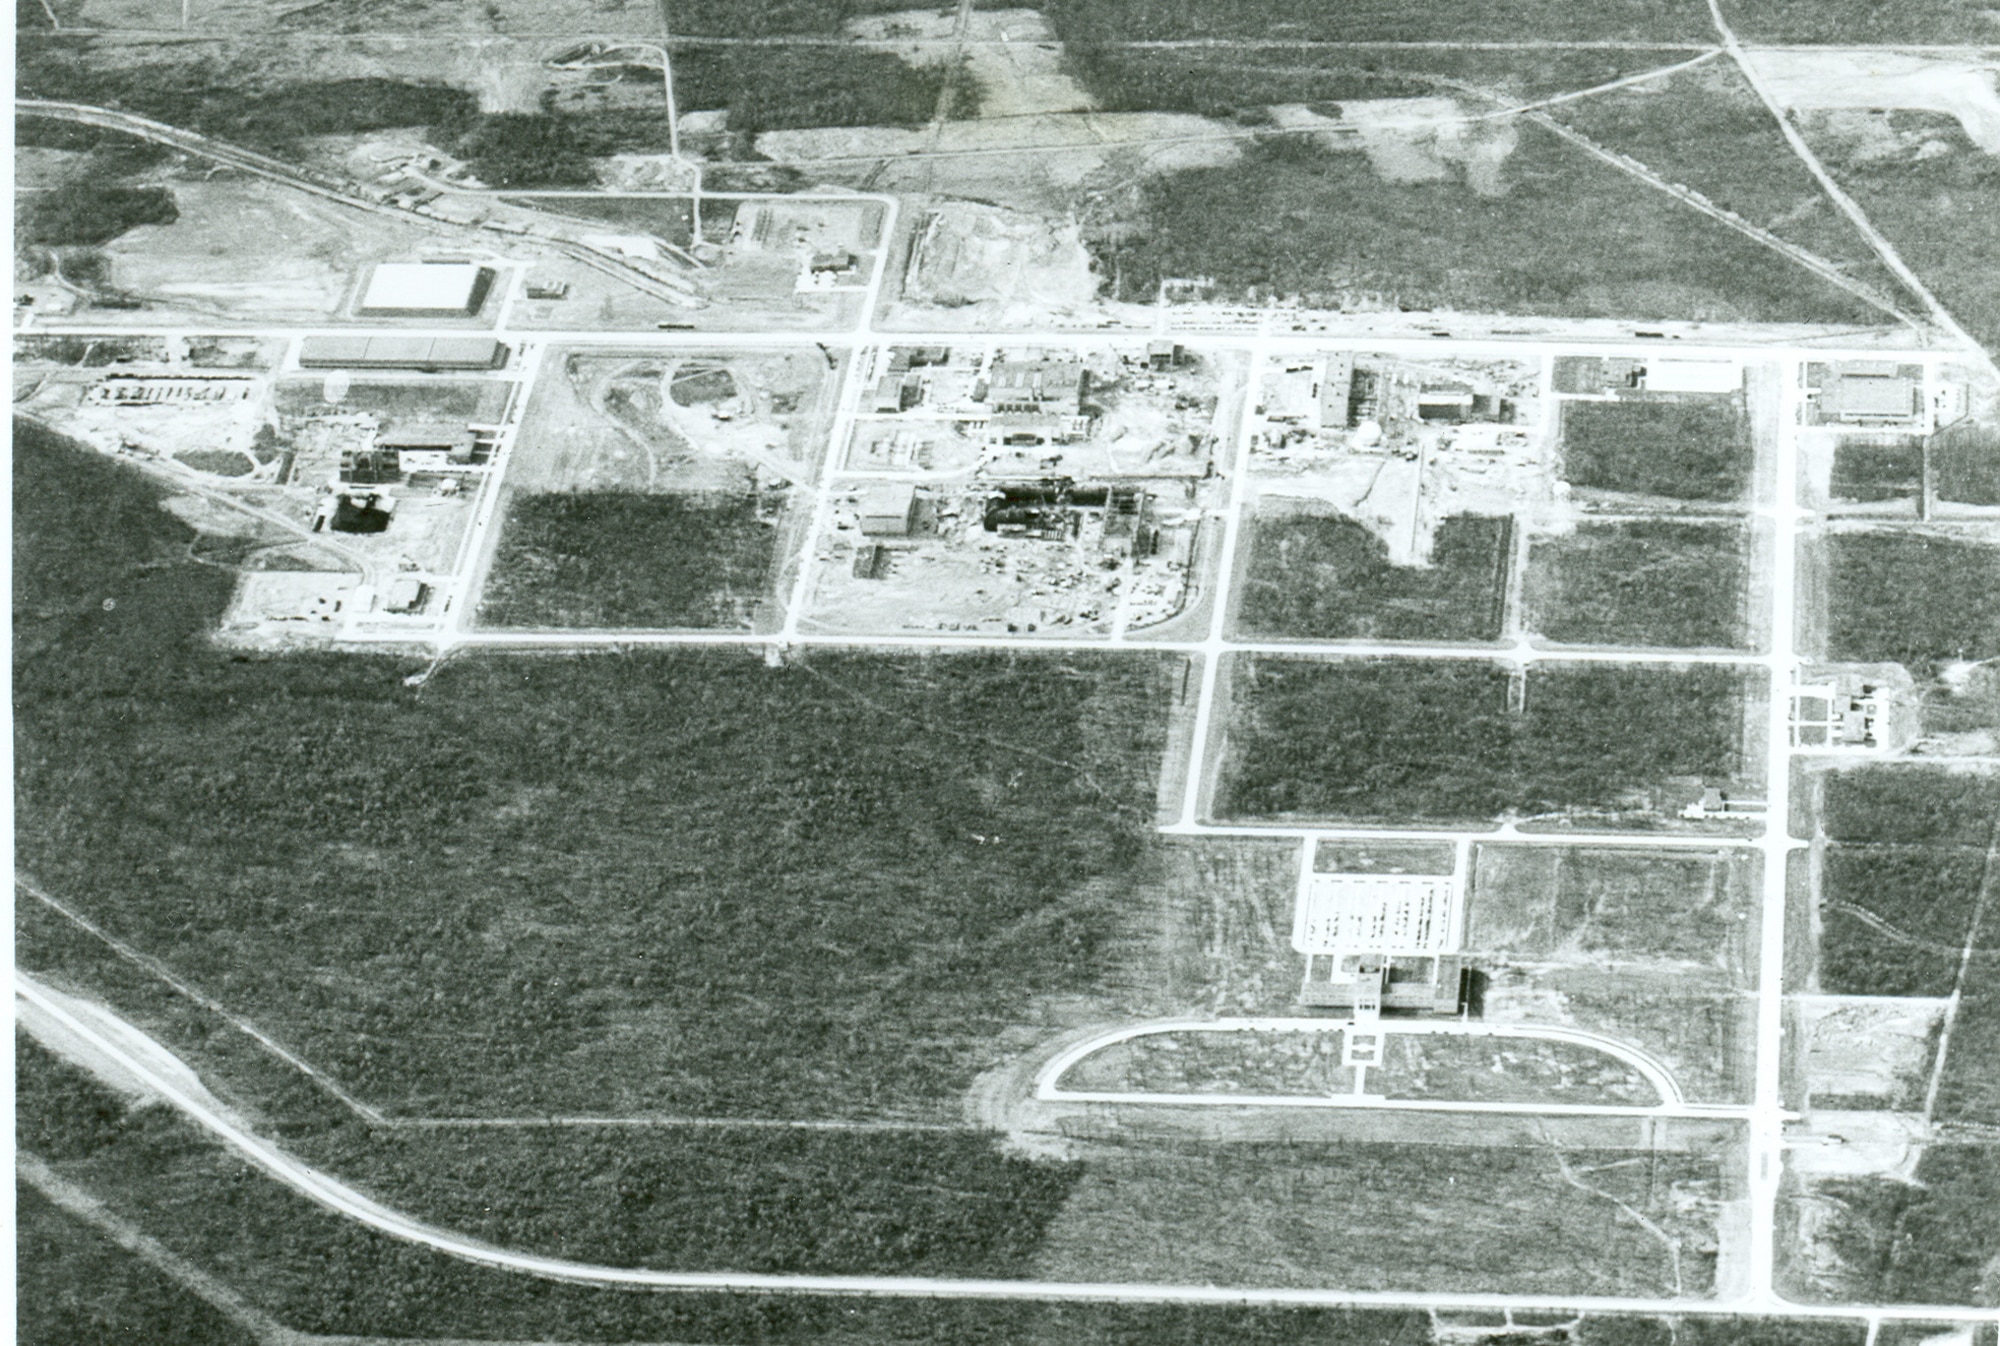 This photo shows Arnold Air Force Base as it appeared during its construction in the 1950s. During the month of October, 70 years ago, President Harry Truman signed into law the bills that allowed for the establishment of what would become Arnold Engineering Development Center, now Arnold Engineering Development Complex. (U.S. Air Force photo)